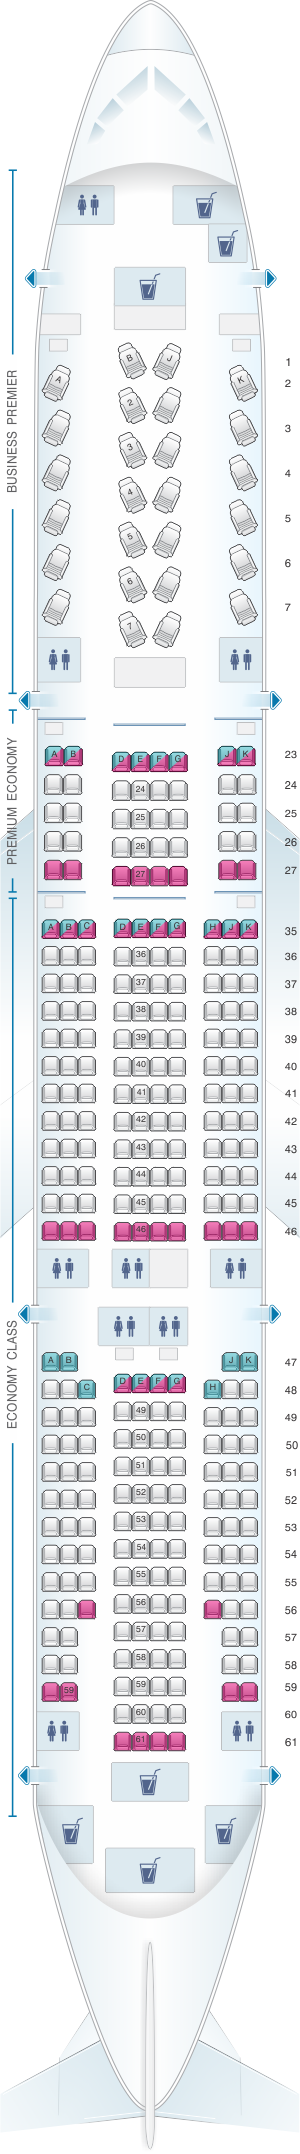 Seat map for Air New Zealand Boeing B777 200